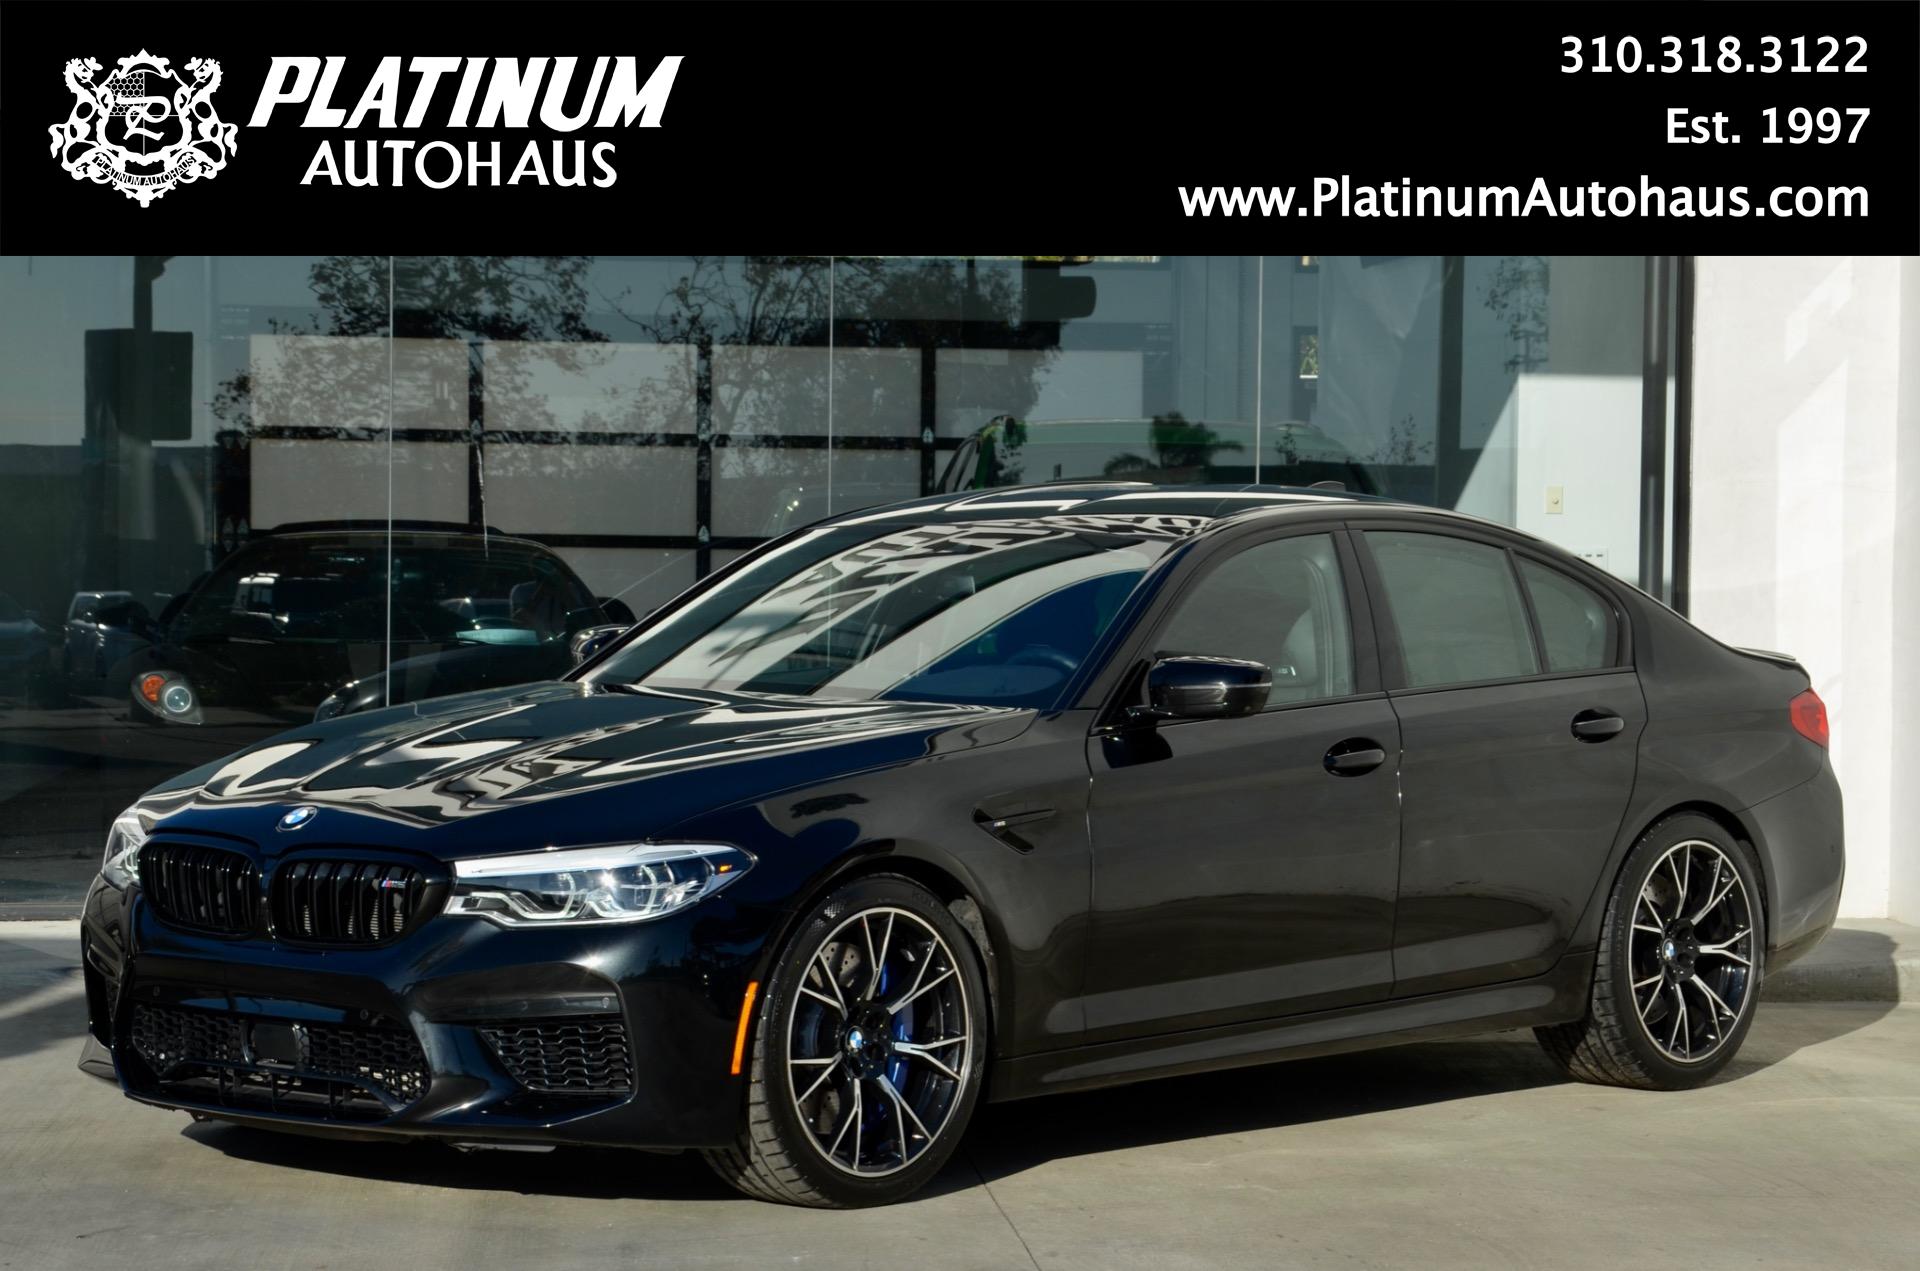 2020 Bmw M5 Competition Stock # 7971 For Sale Near Redondo Beach, Ca | Ca  Bmw Dealer